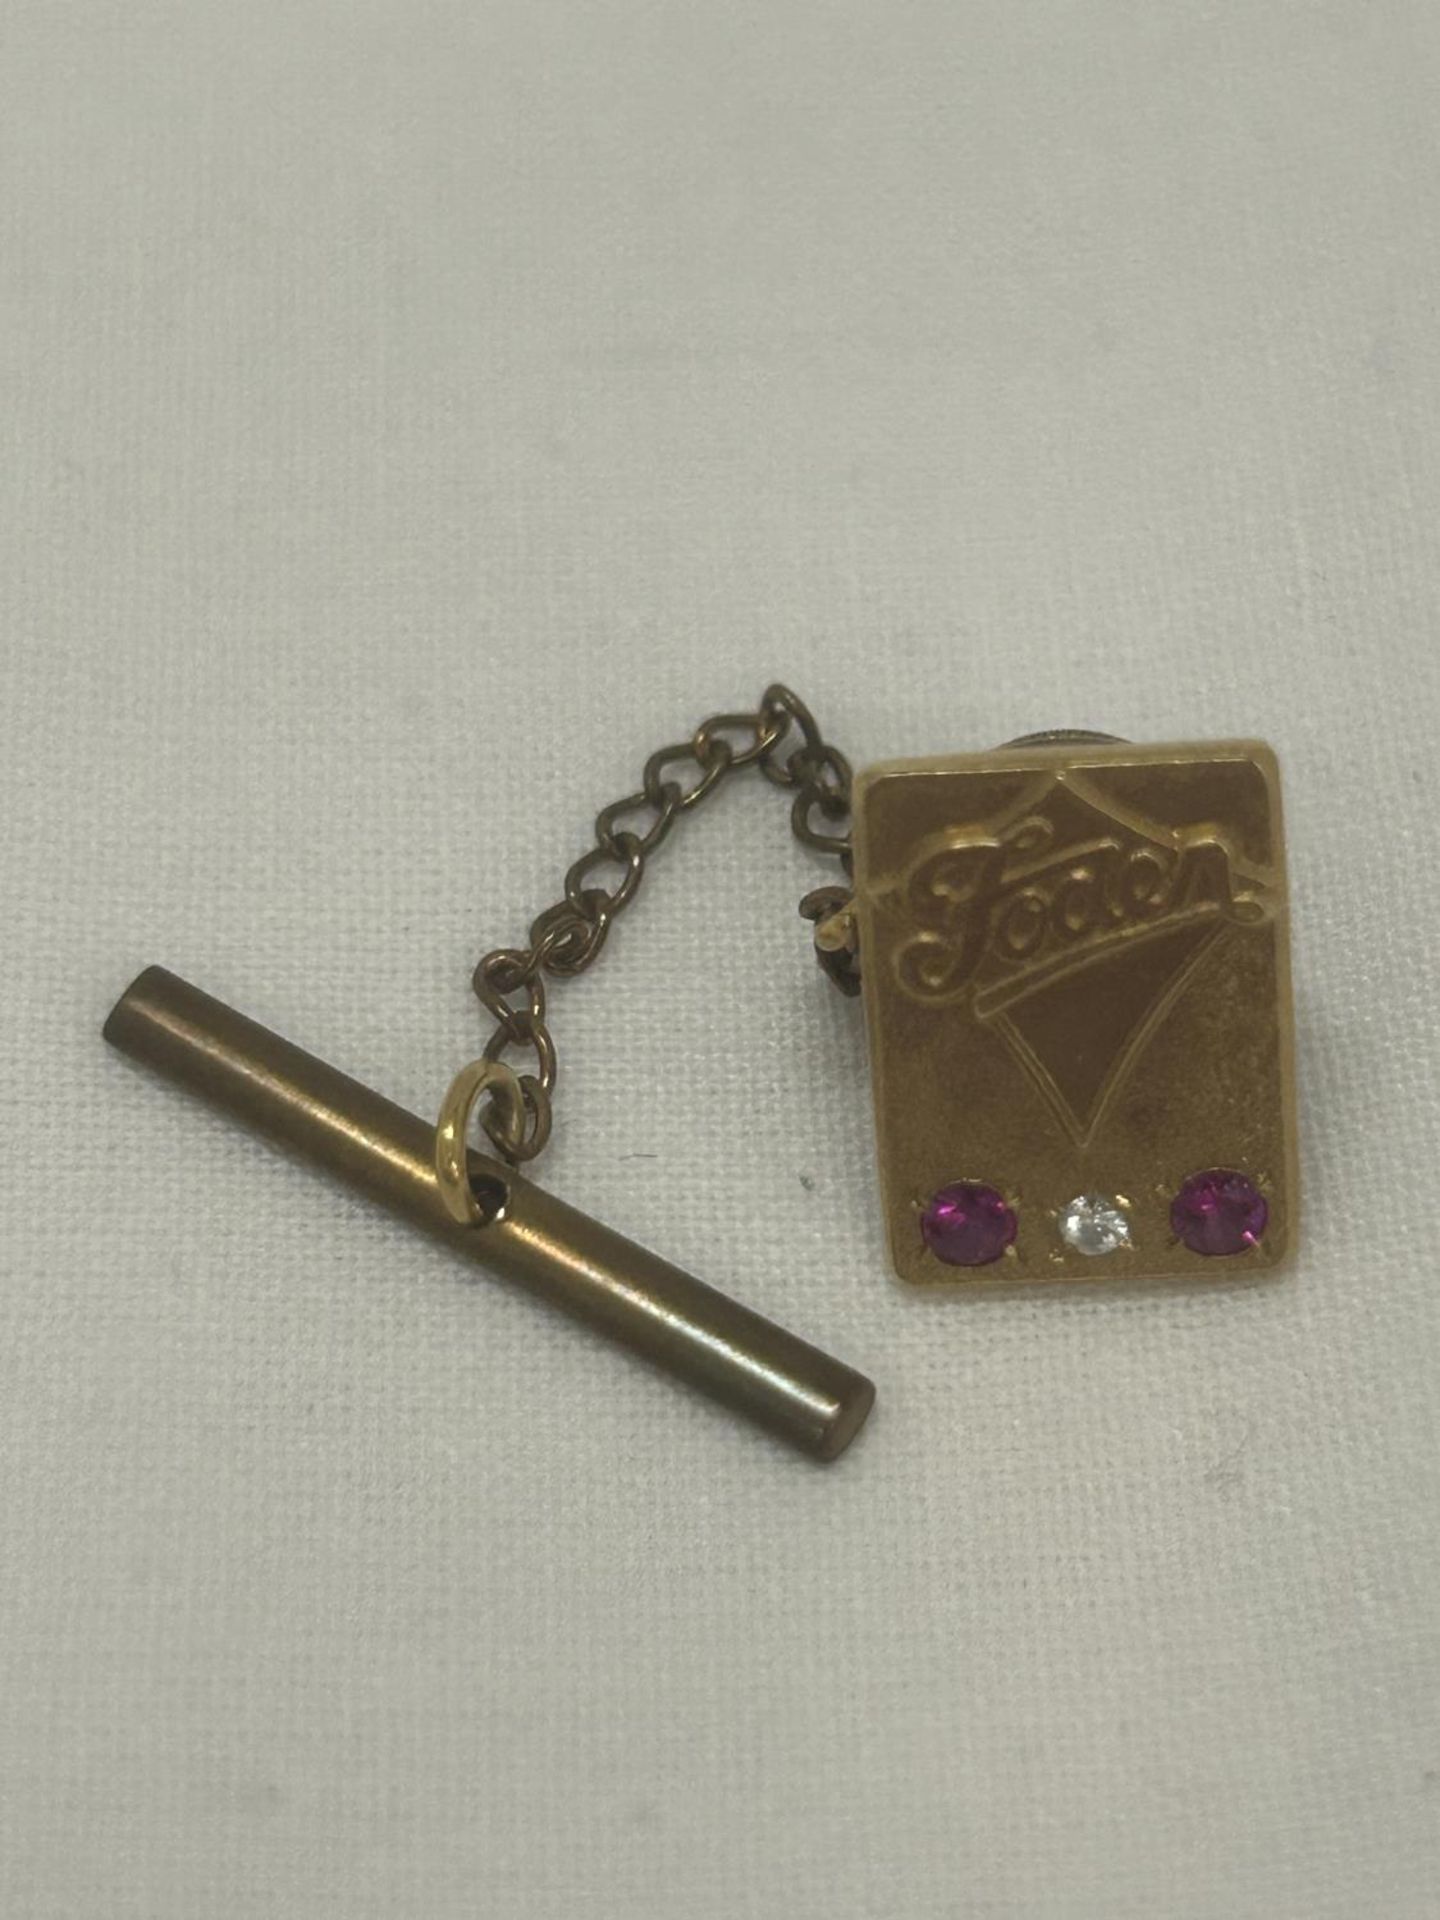 A HALLMARKED 9CT GOLD DIAMOND AND RUBY 'FODEN' PIN BADGE GROSS WEIGHT 4.84G